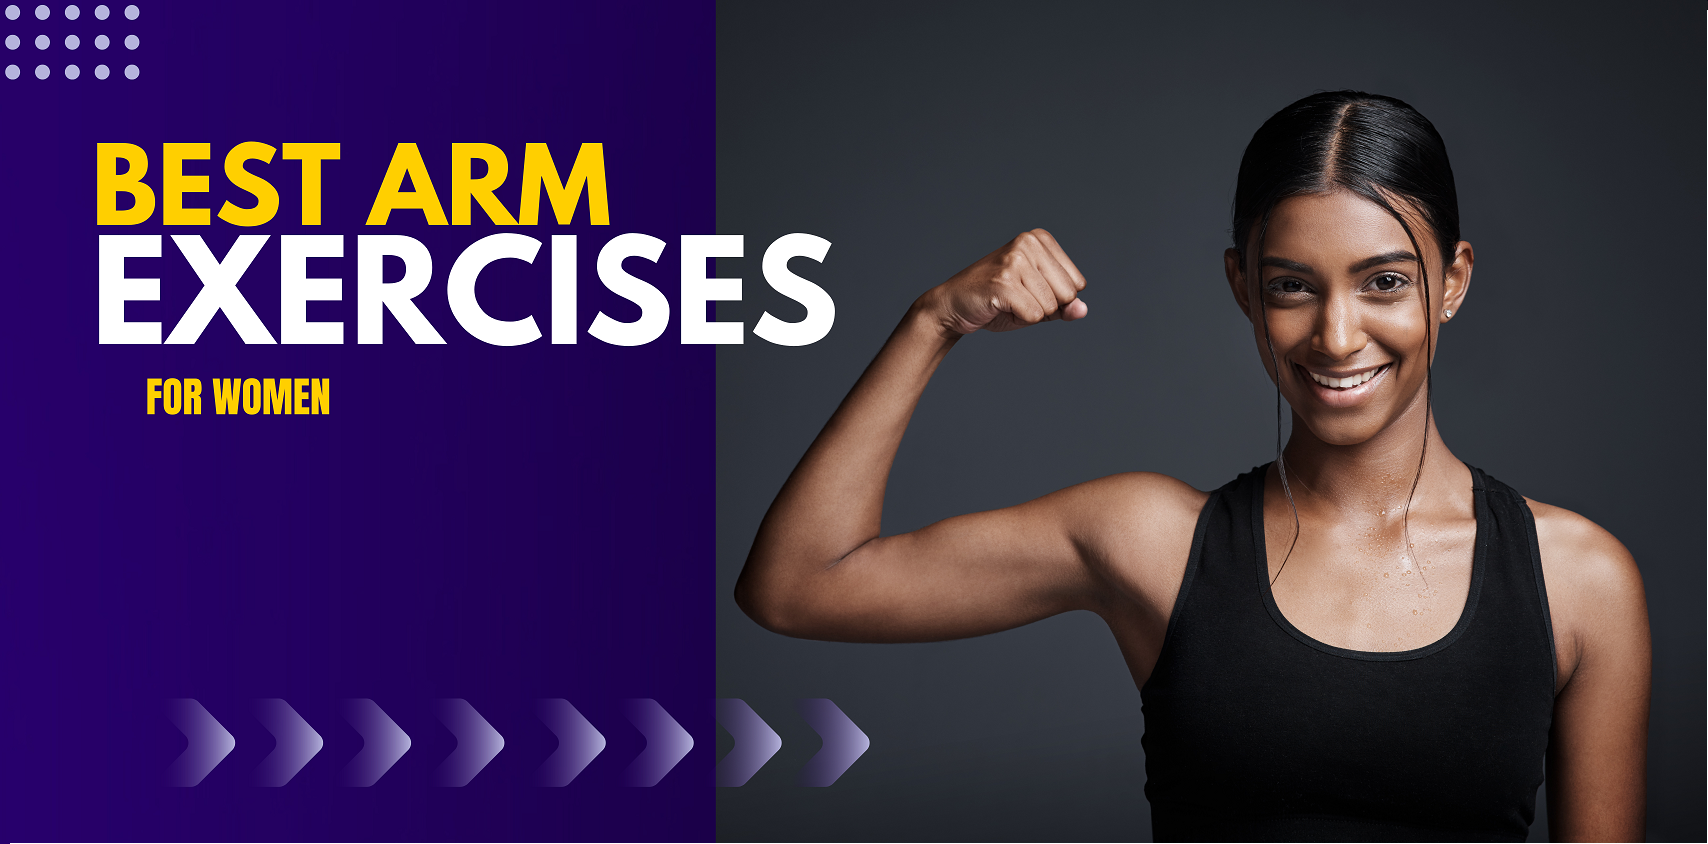 8 Best Arm Exercises for Women - Family First Chiropractic & Wellness Center